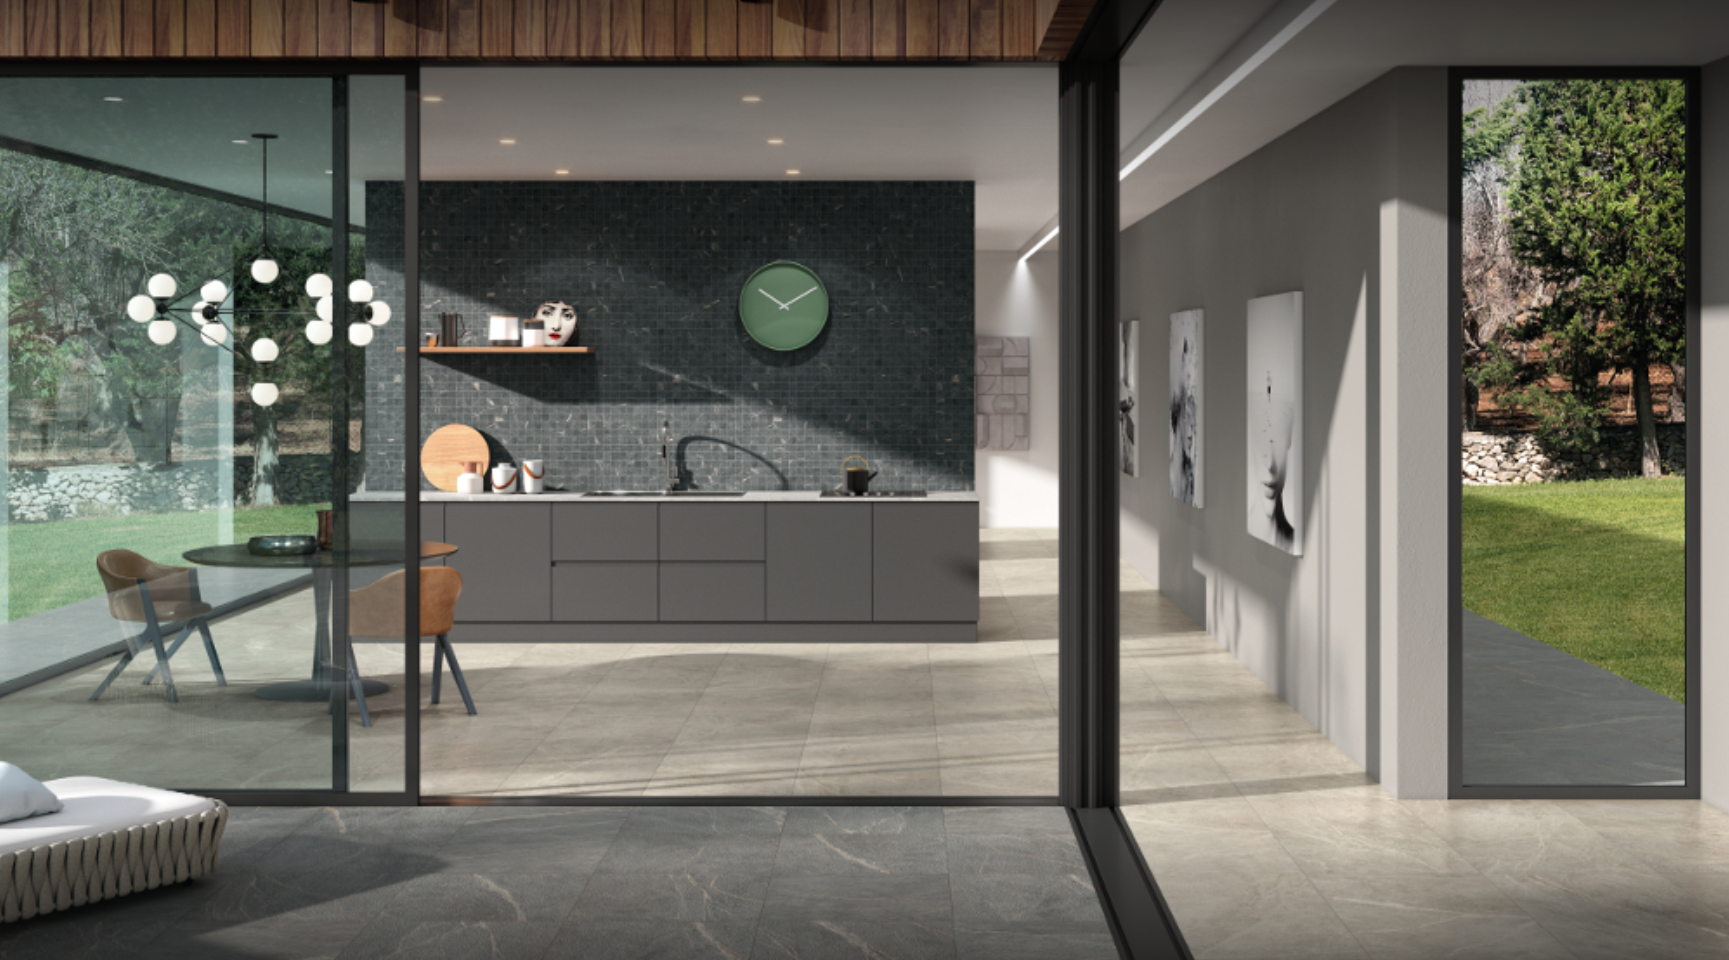 Bedrock Tiles are the First Tiling Company to Become Carbon Neutral